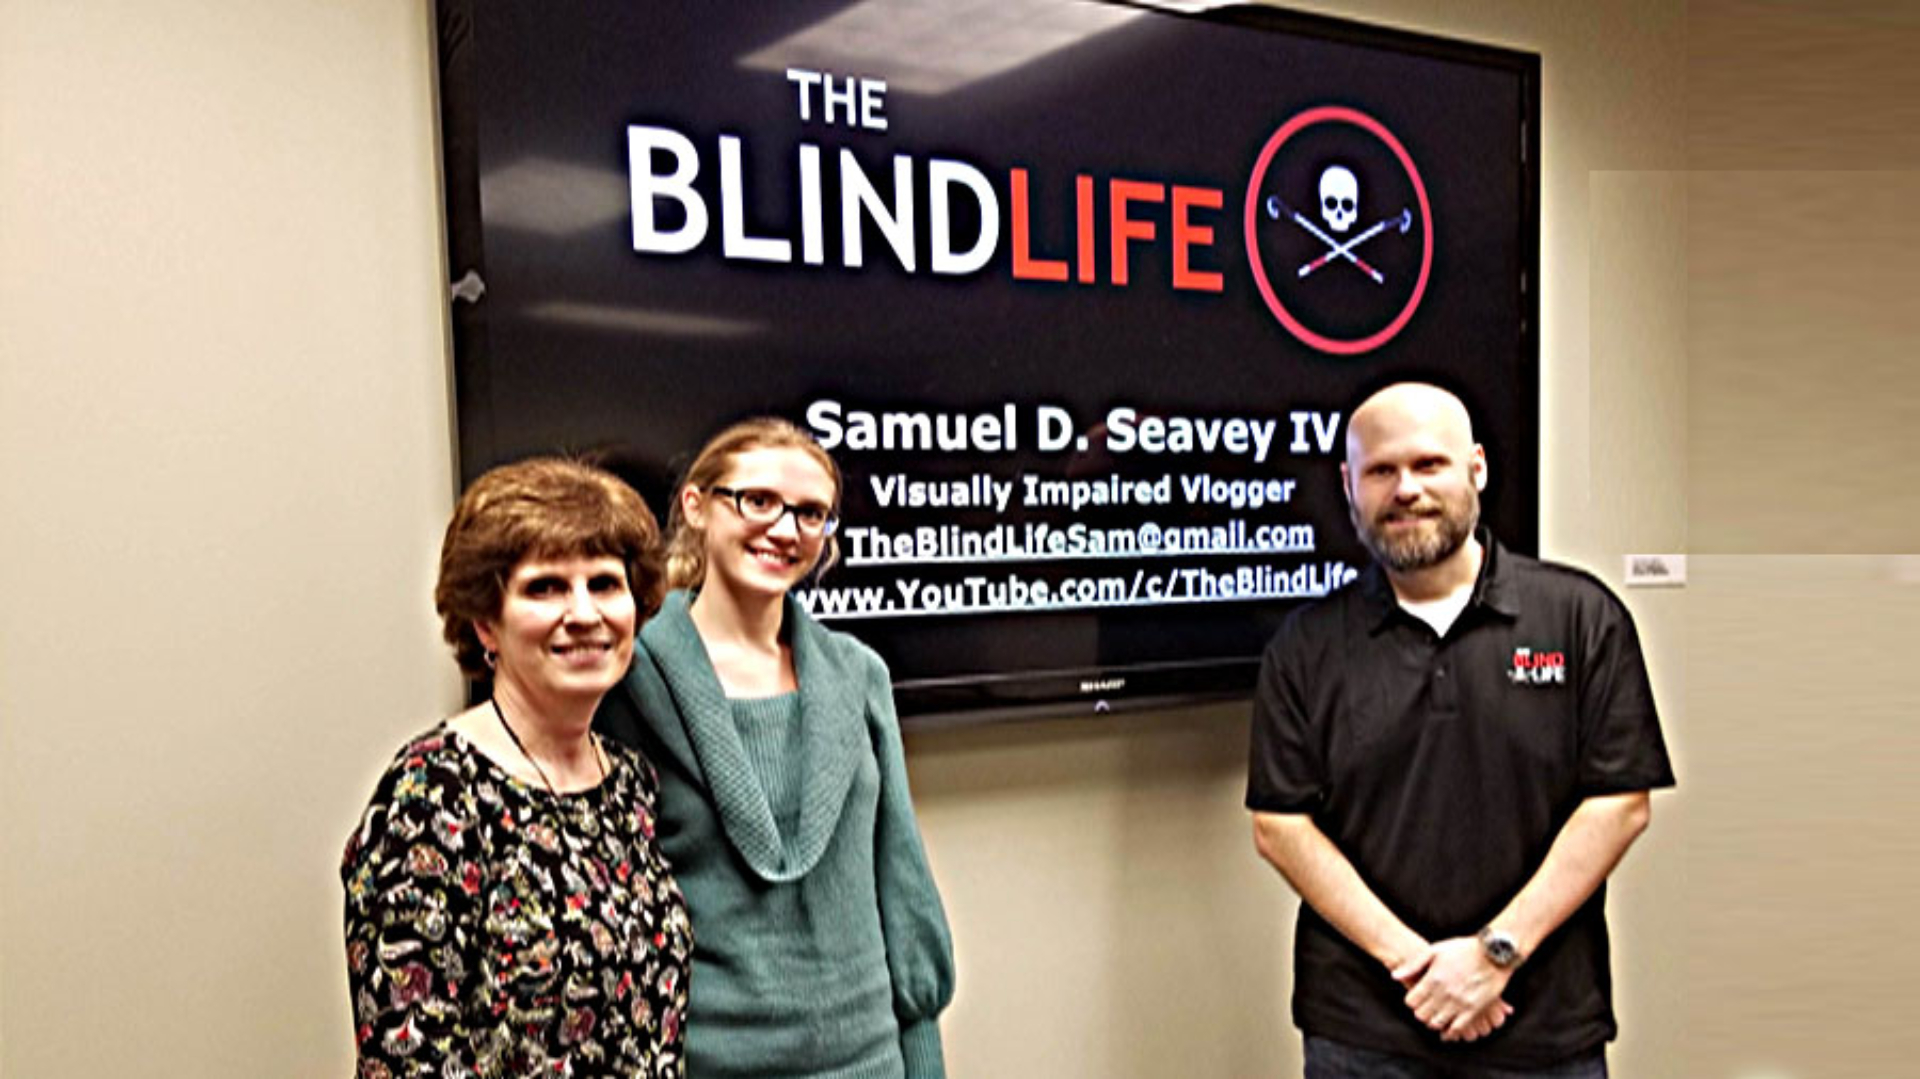 Sam Seavey in front of The Blind Life Poster  at a Speaking Engagement